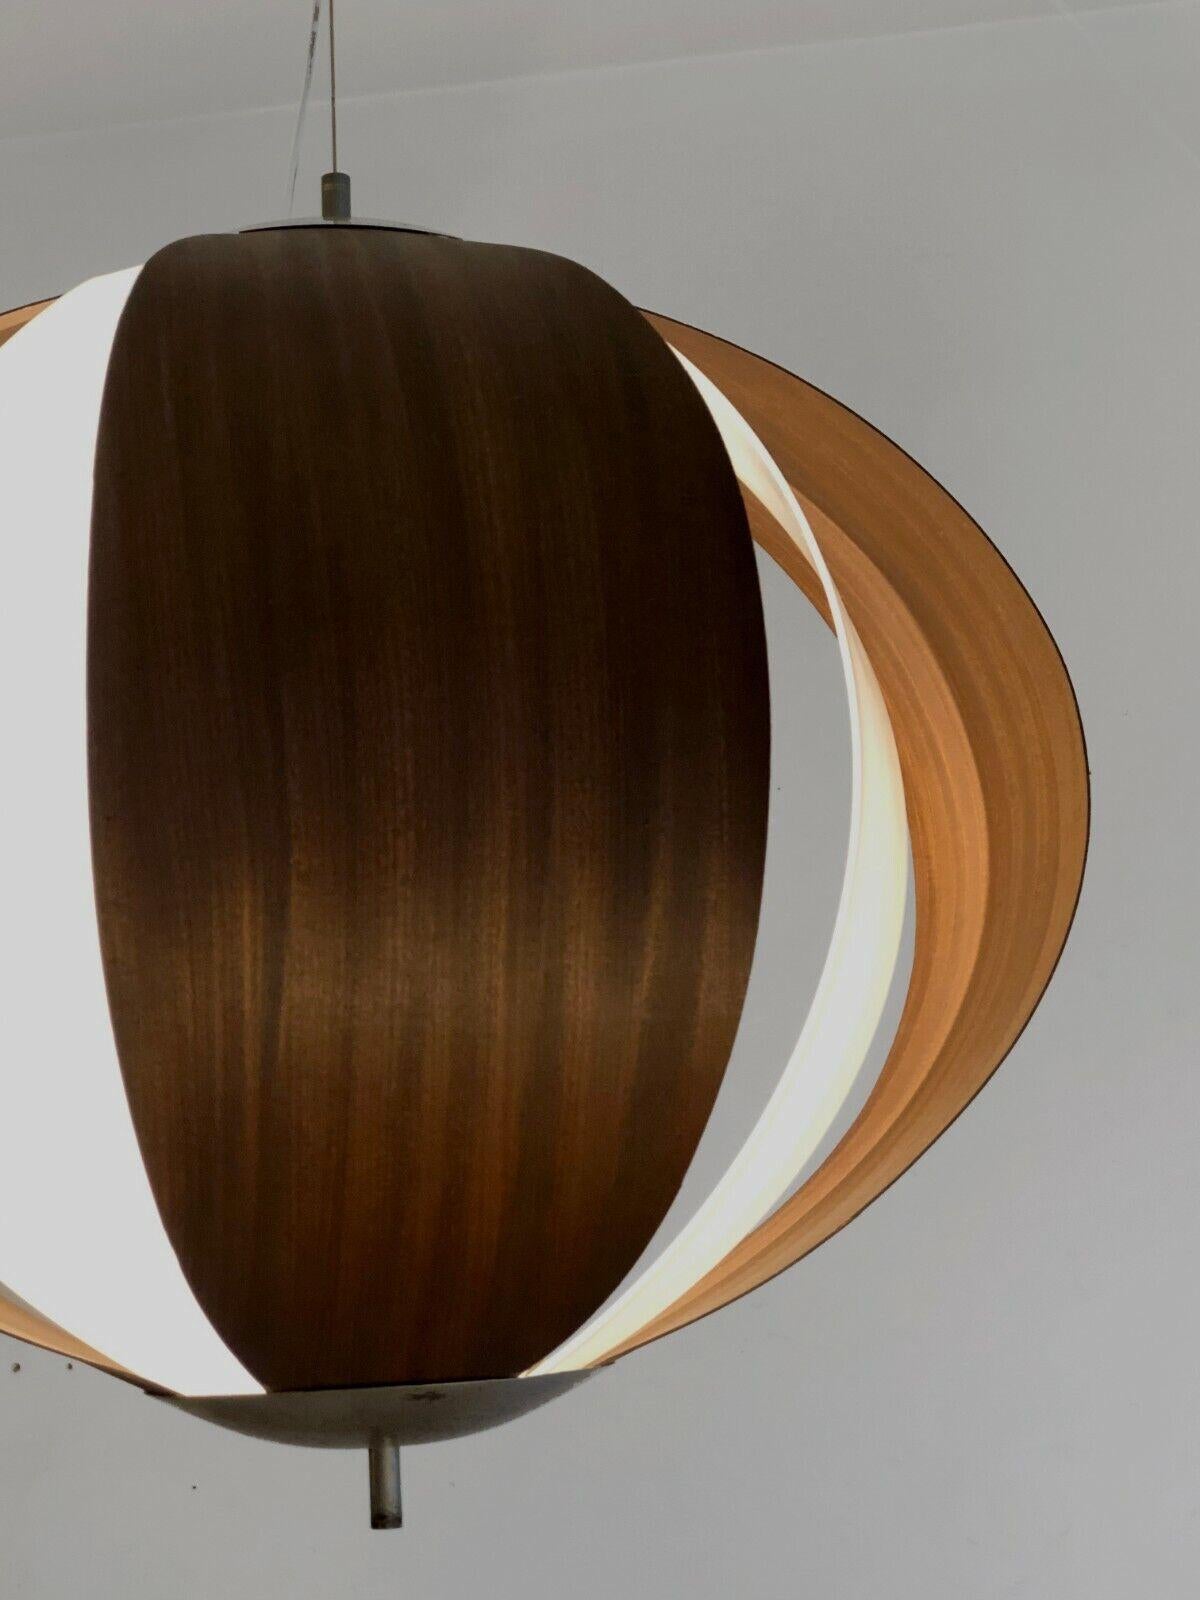 A MID-CENTURY-MODERN MODERNIST SPACE-AGE Ceiling Light by REGGIANI, Italy 1960  For Sale 3